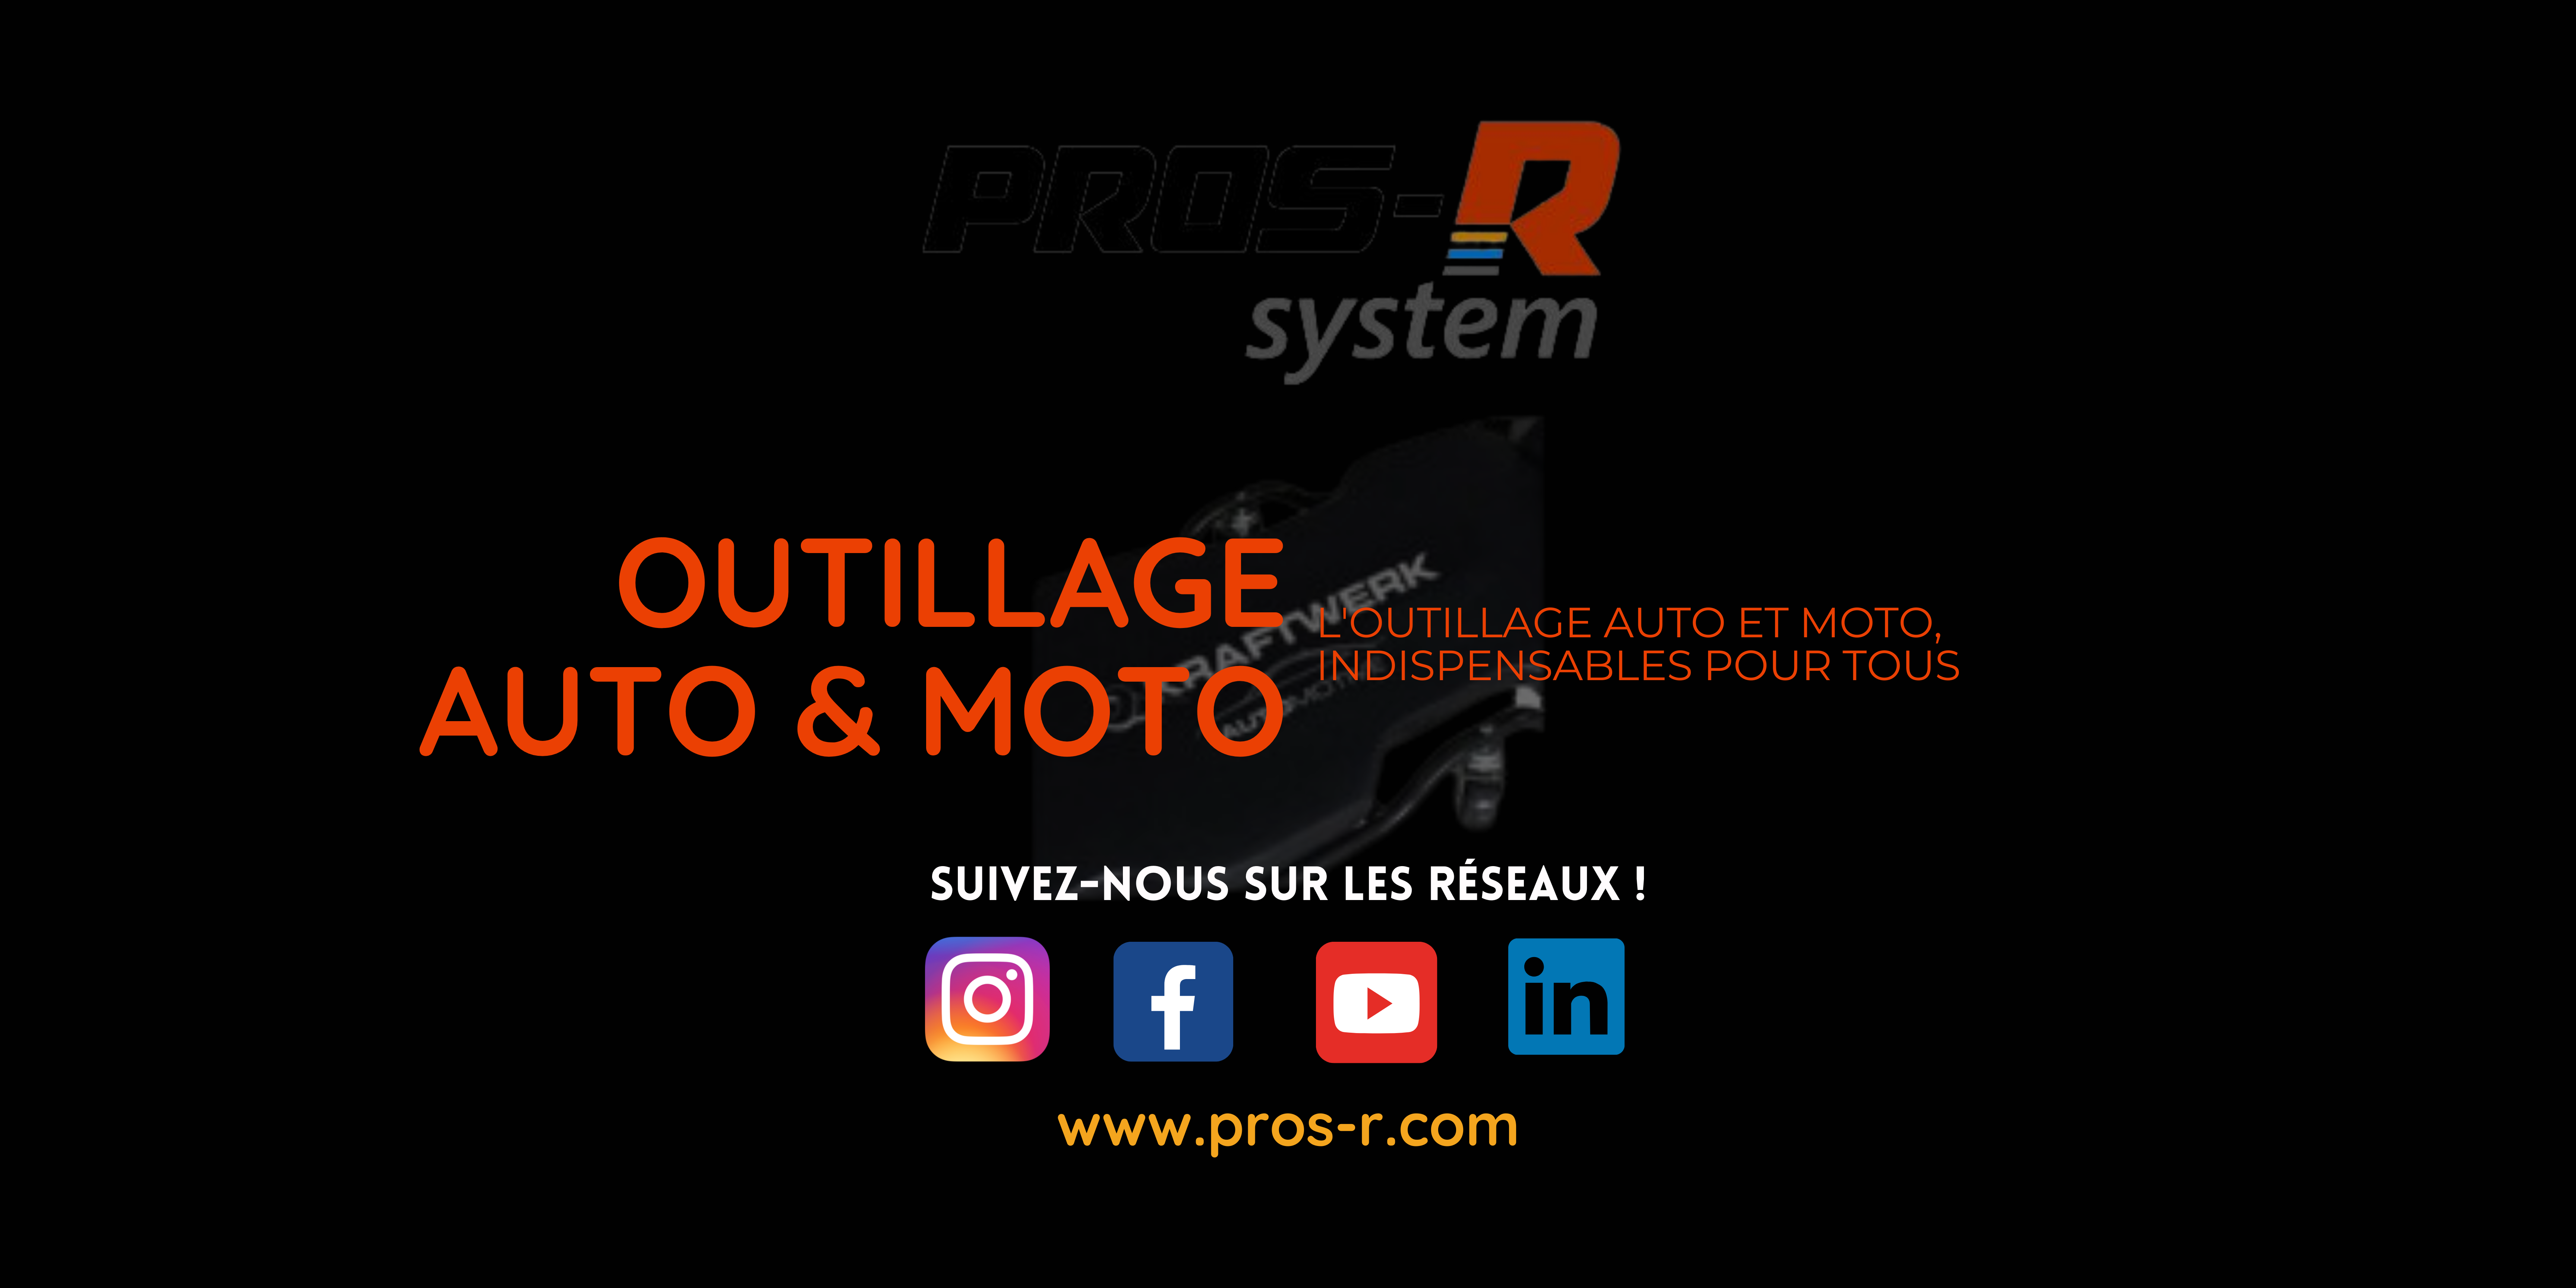 Essential tools for cars and motorcycles: Easily maintain and troubleshoot your vehicle. PROS-R System